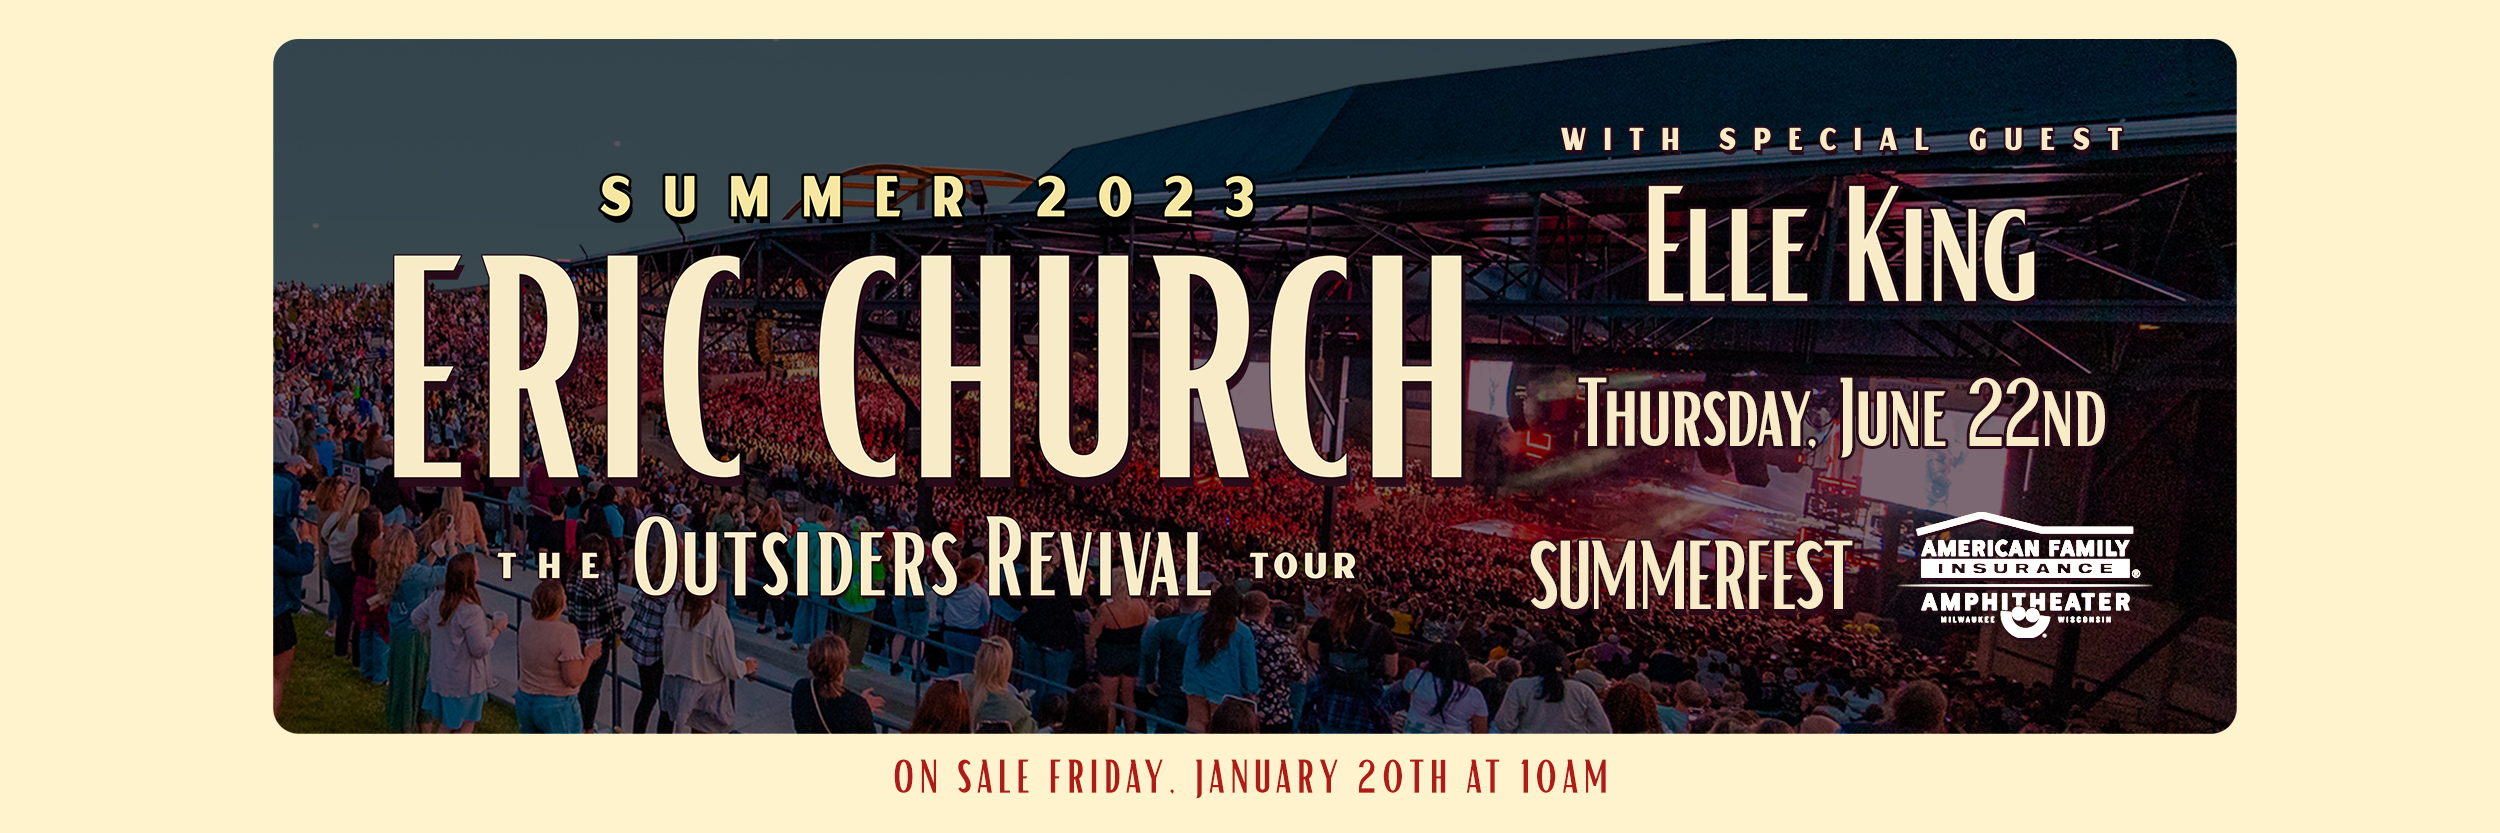 Eric Church headlines Summerfest on June 22 with special guest Elle King